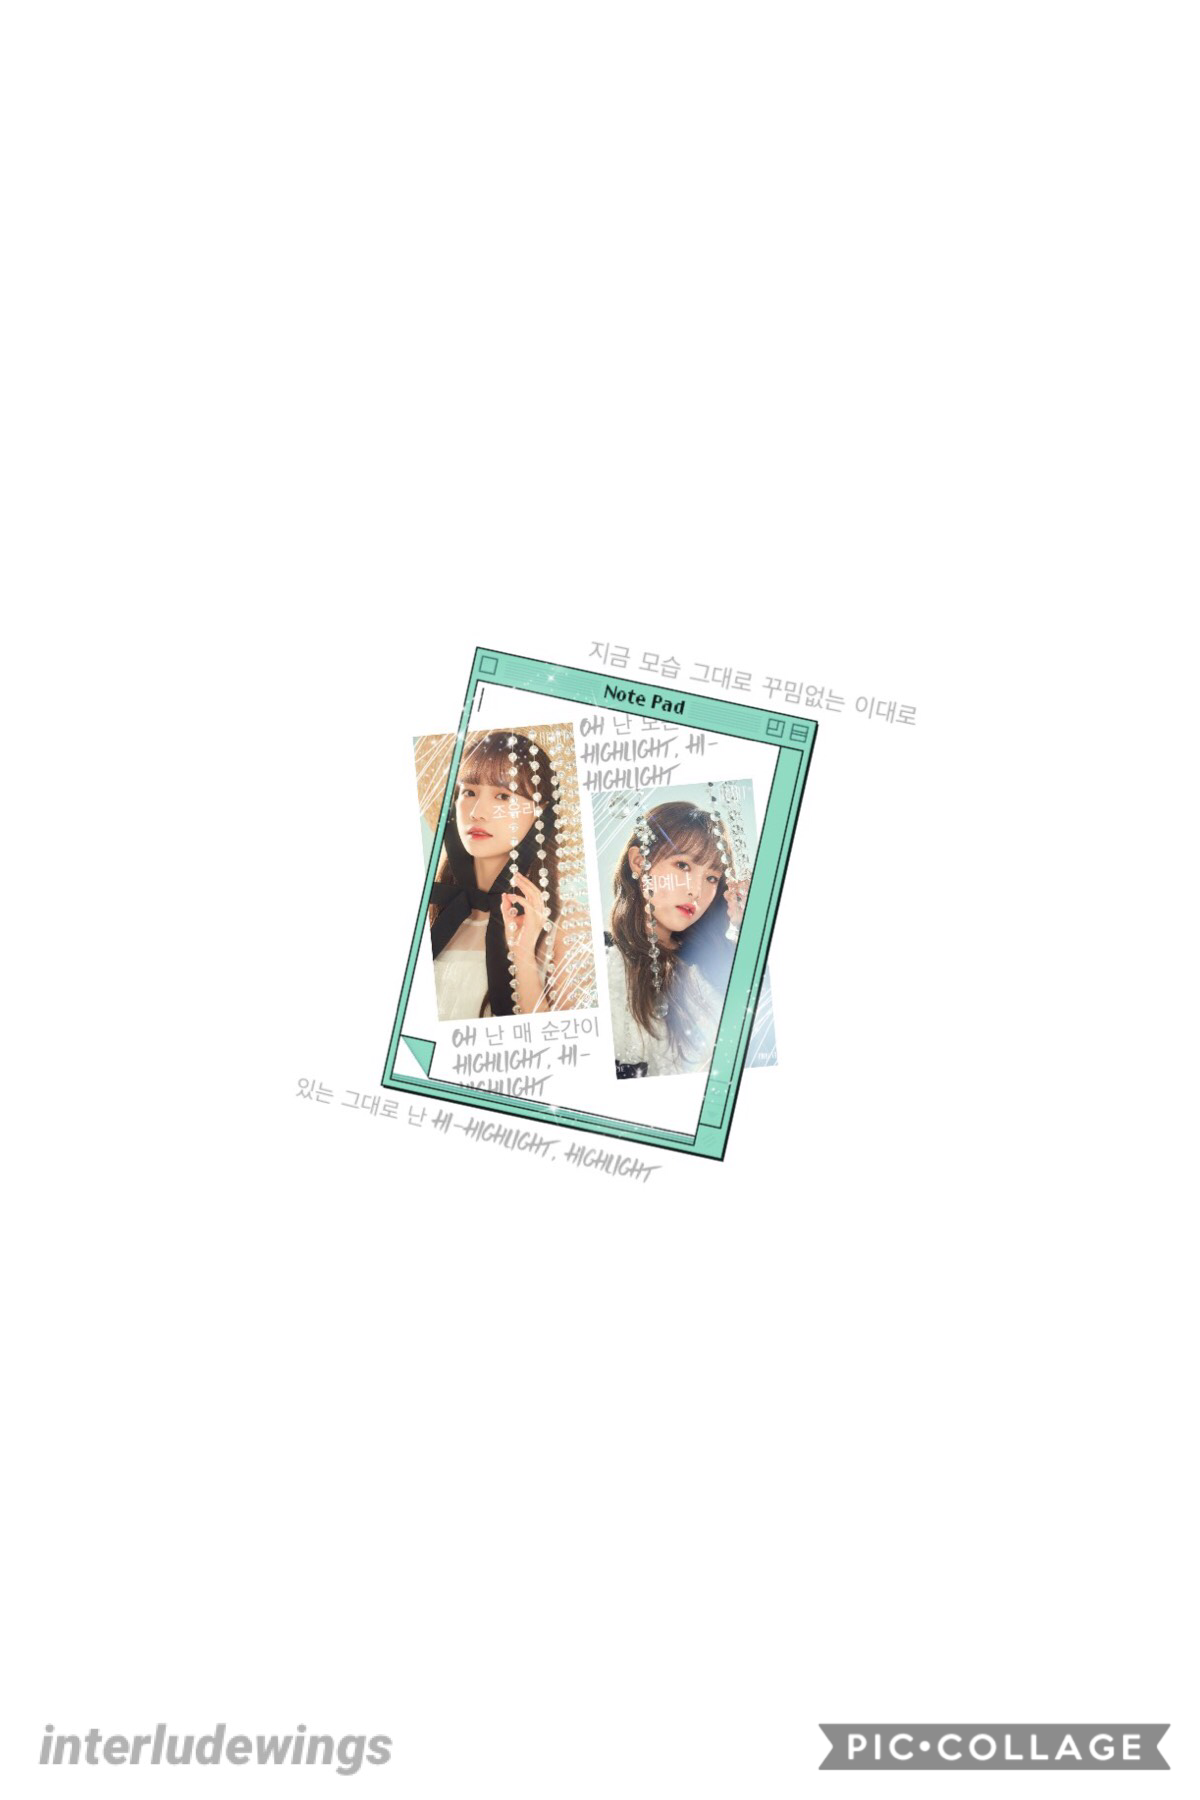 💎 open 💎
yuri, yena~izone 
this is: so ugly 
my edits have rlly been going downhill lately hhhh 
n e ways stan izone 💫